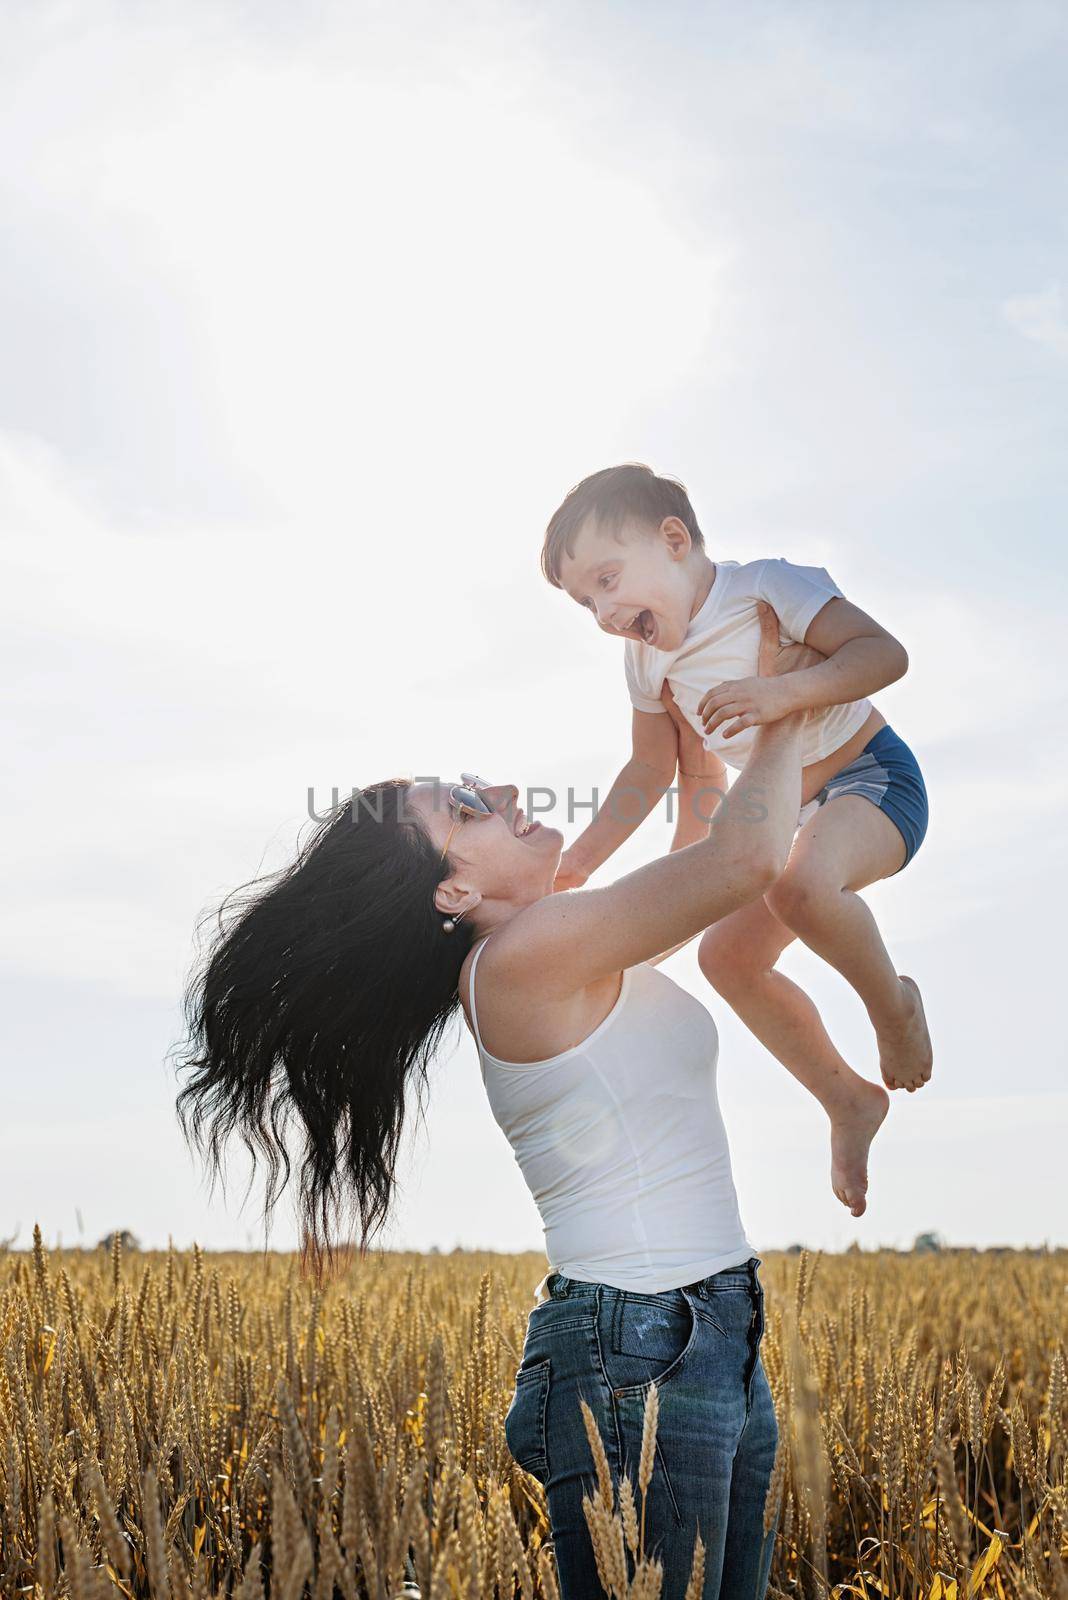 Happy family on a summer walk, mother and child walk in the wheat field and enjoy the beautiful nature, mom pick up child